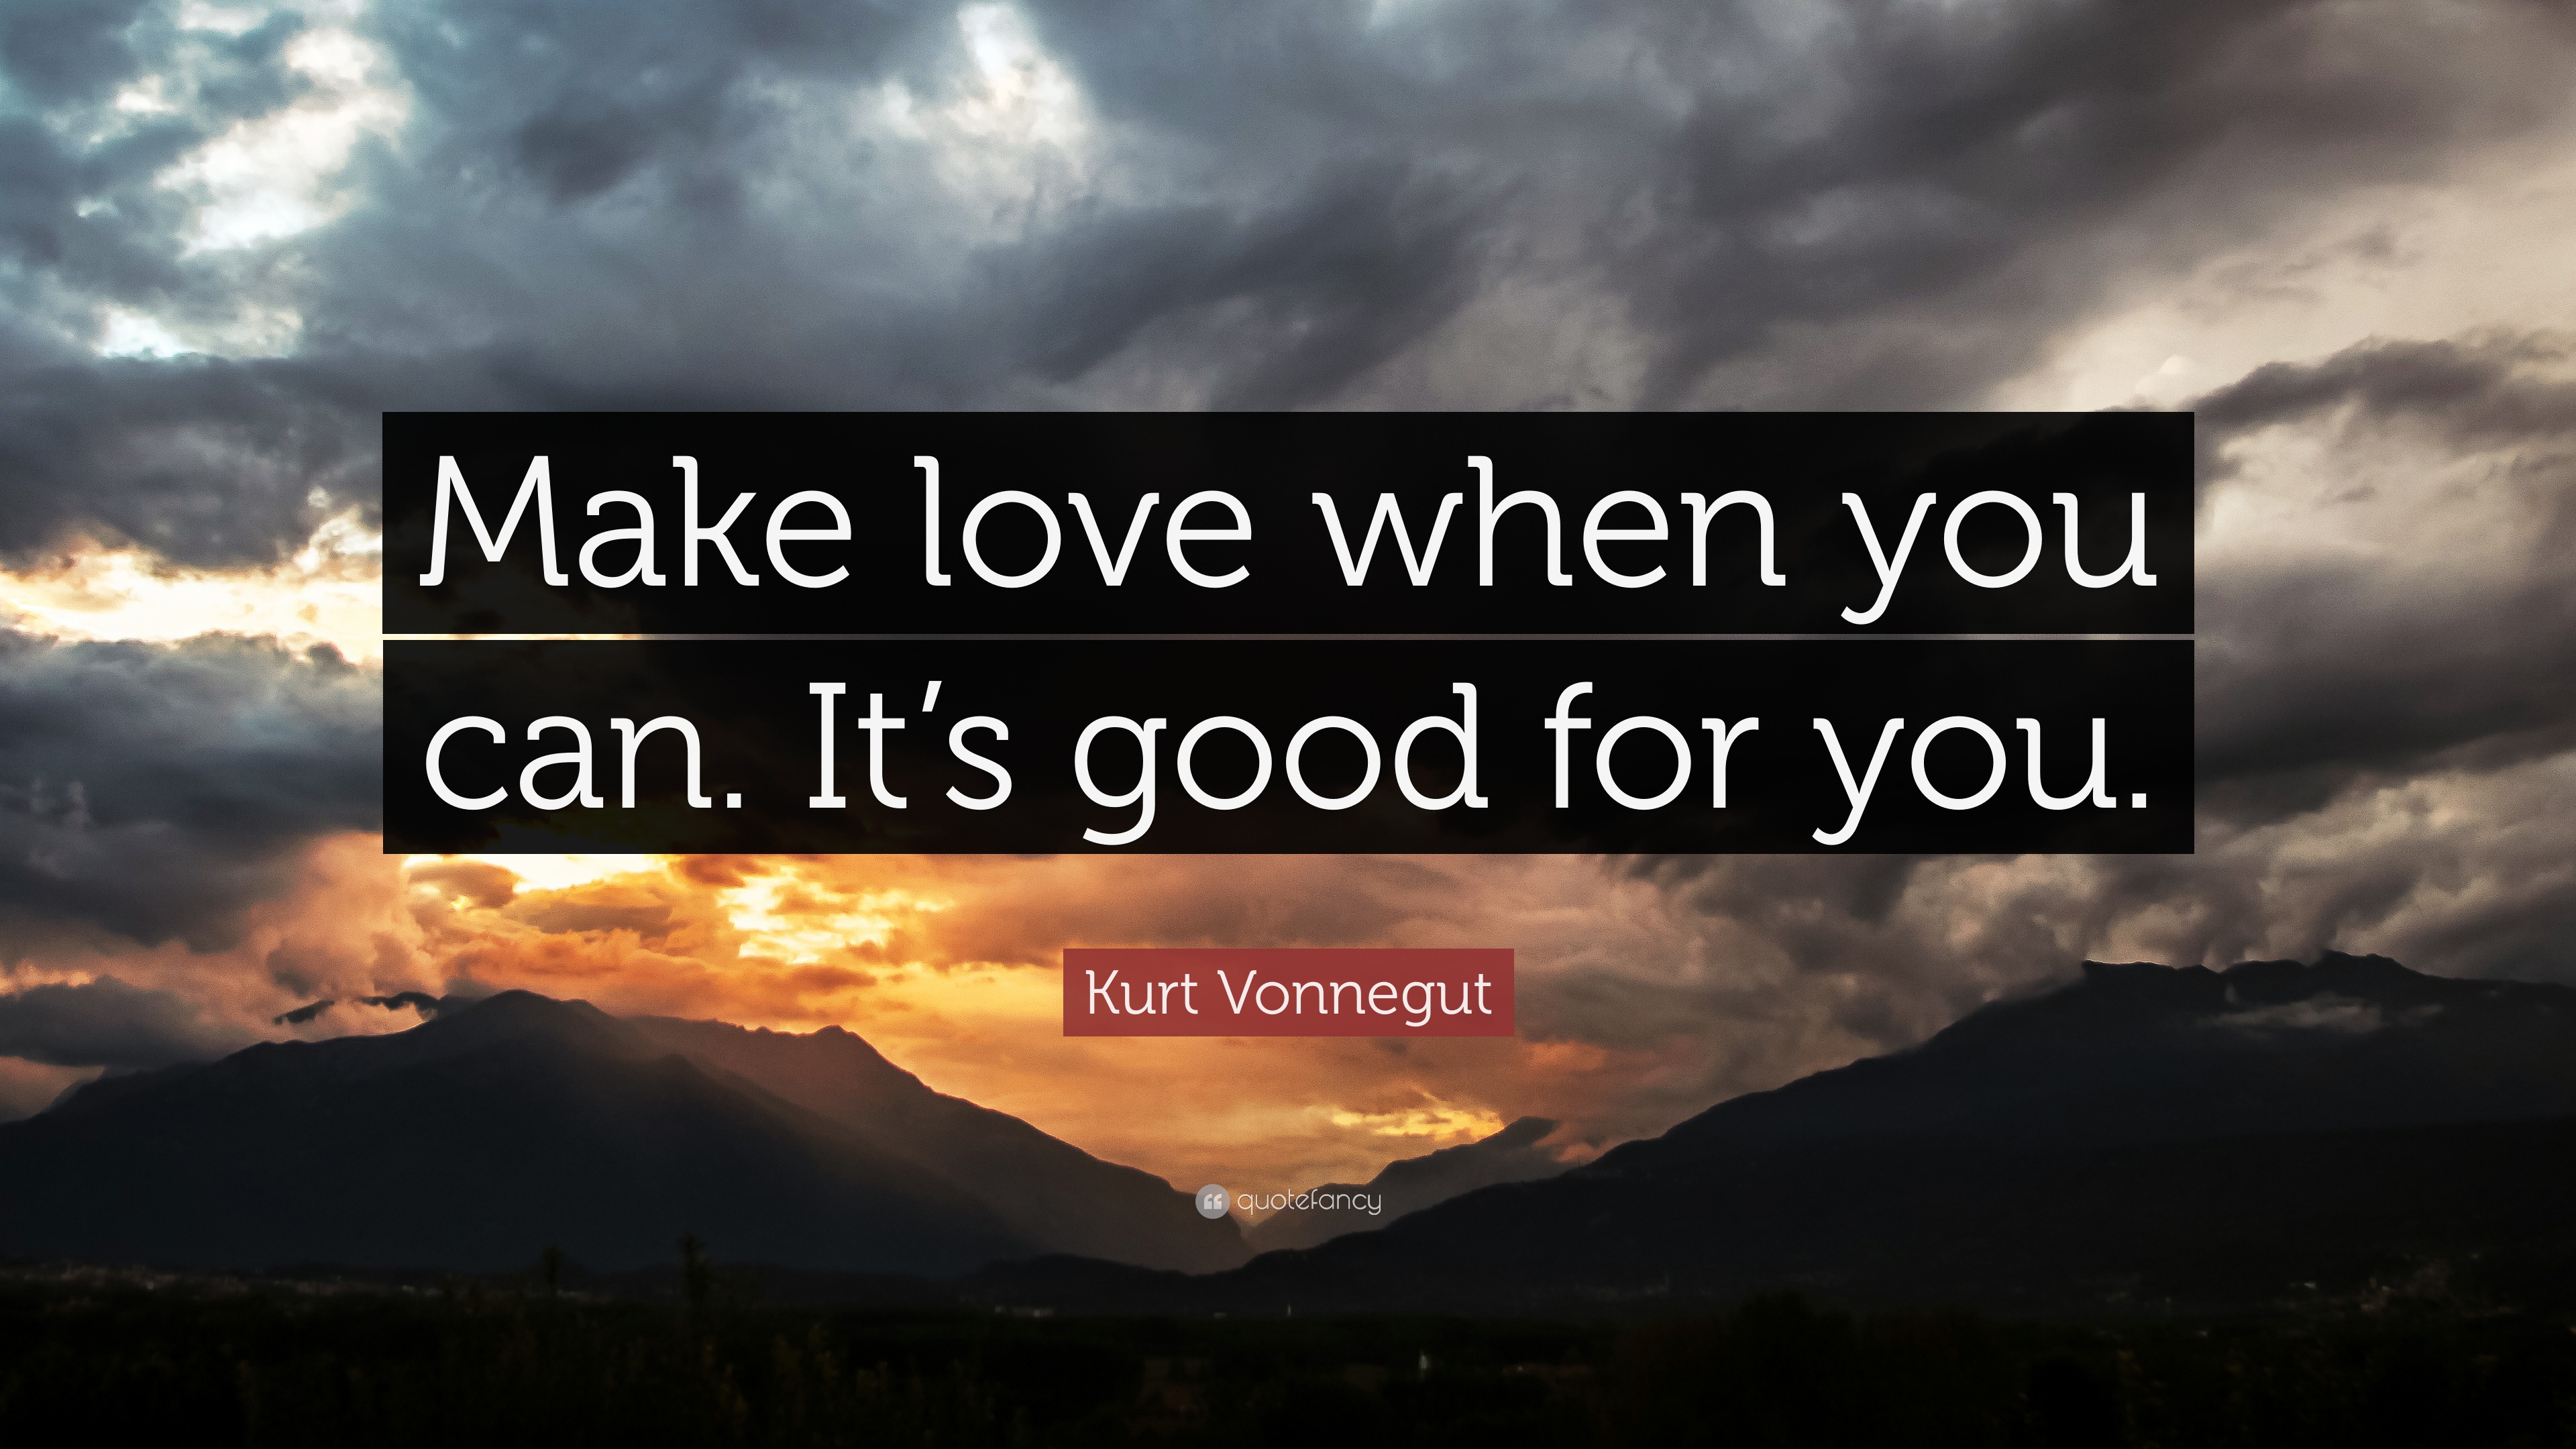 Kurt Vonnegut Quote “Make love when you can It s good for you